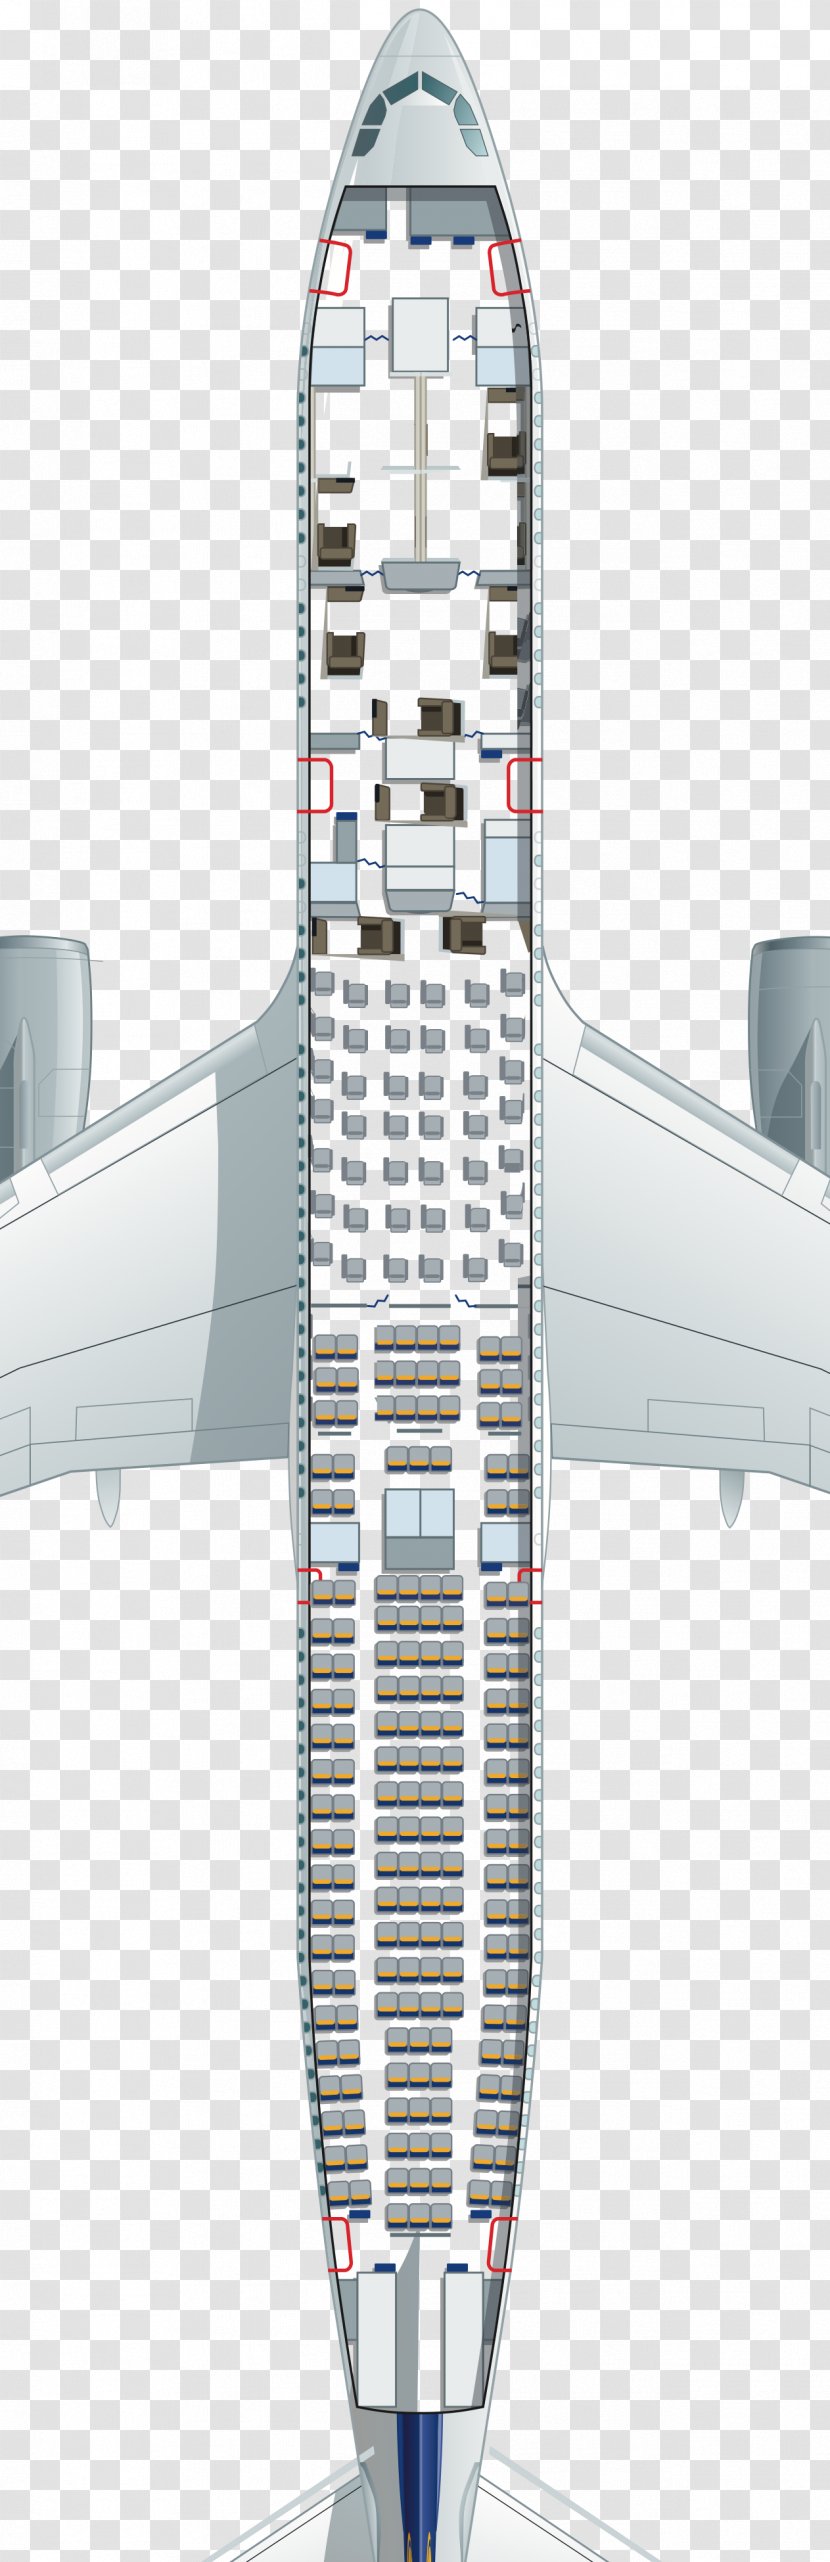 Airplane Airline Seat First Class - Airbus Group Se Transparent PNG